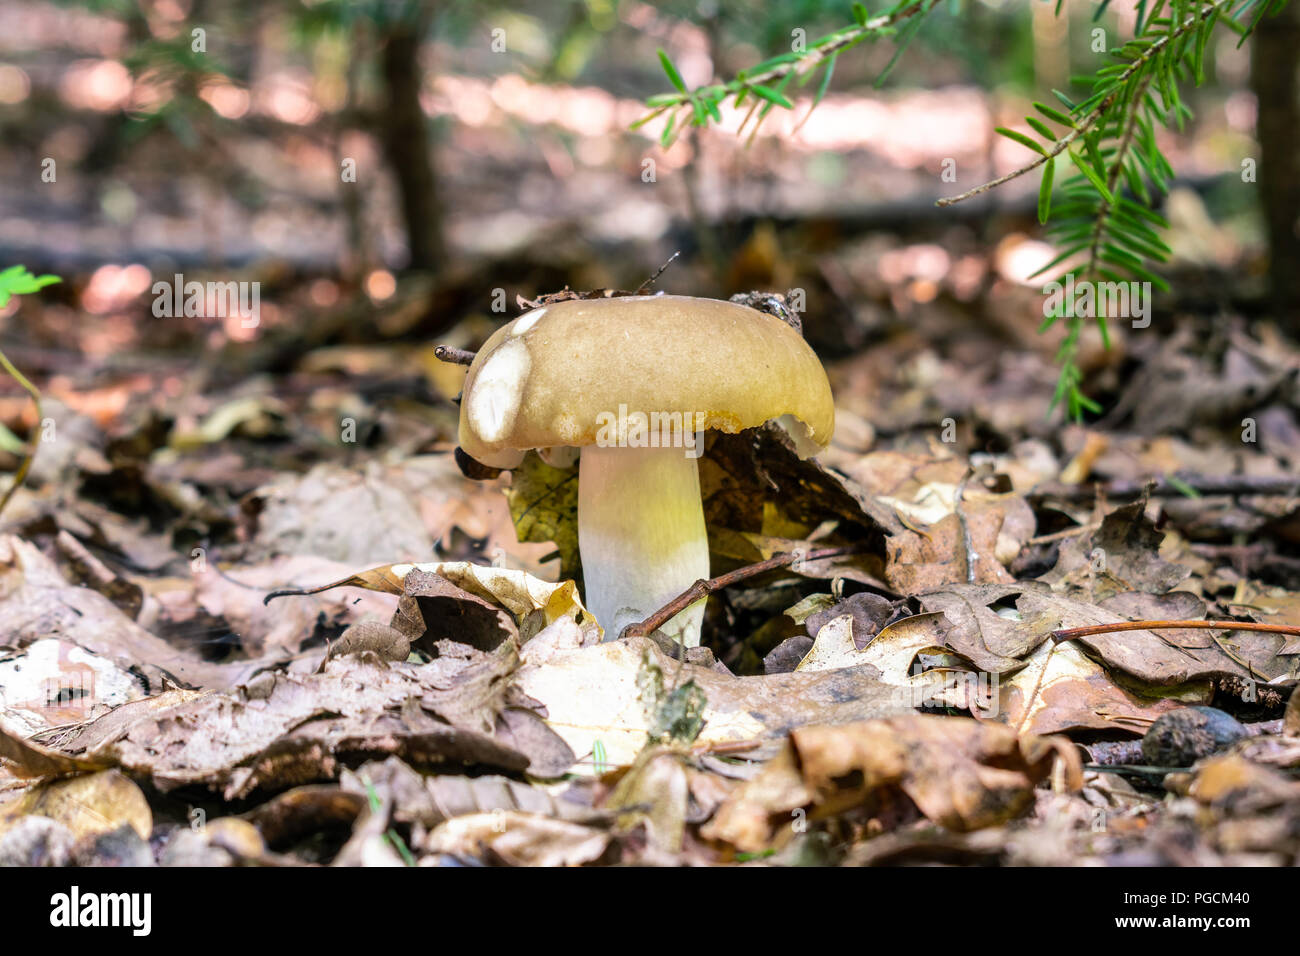 Mushroom in the forest - suitable as a natural autumn background Stock Photo